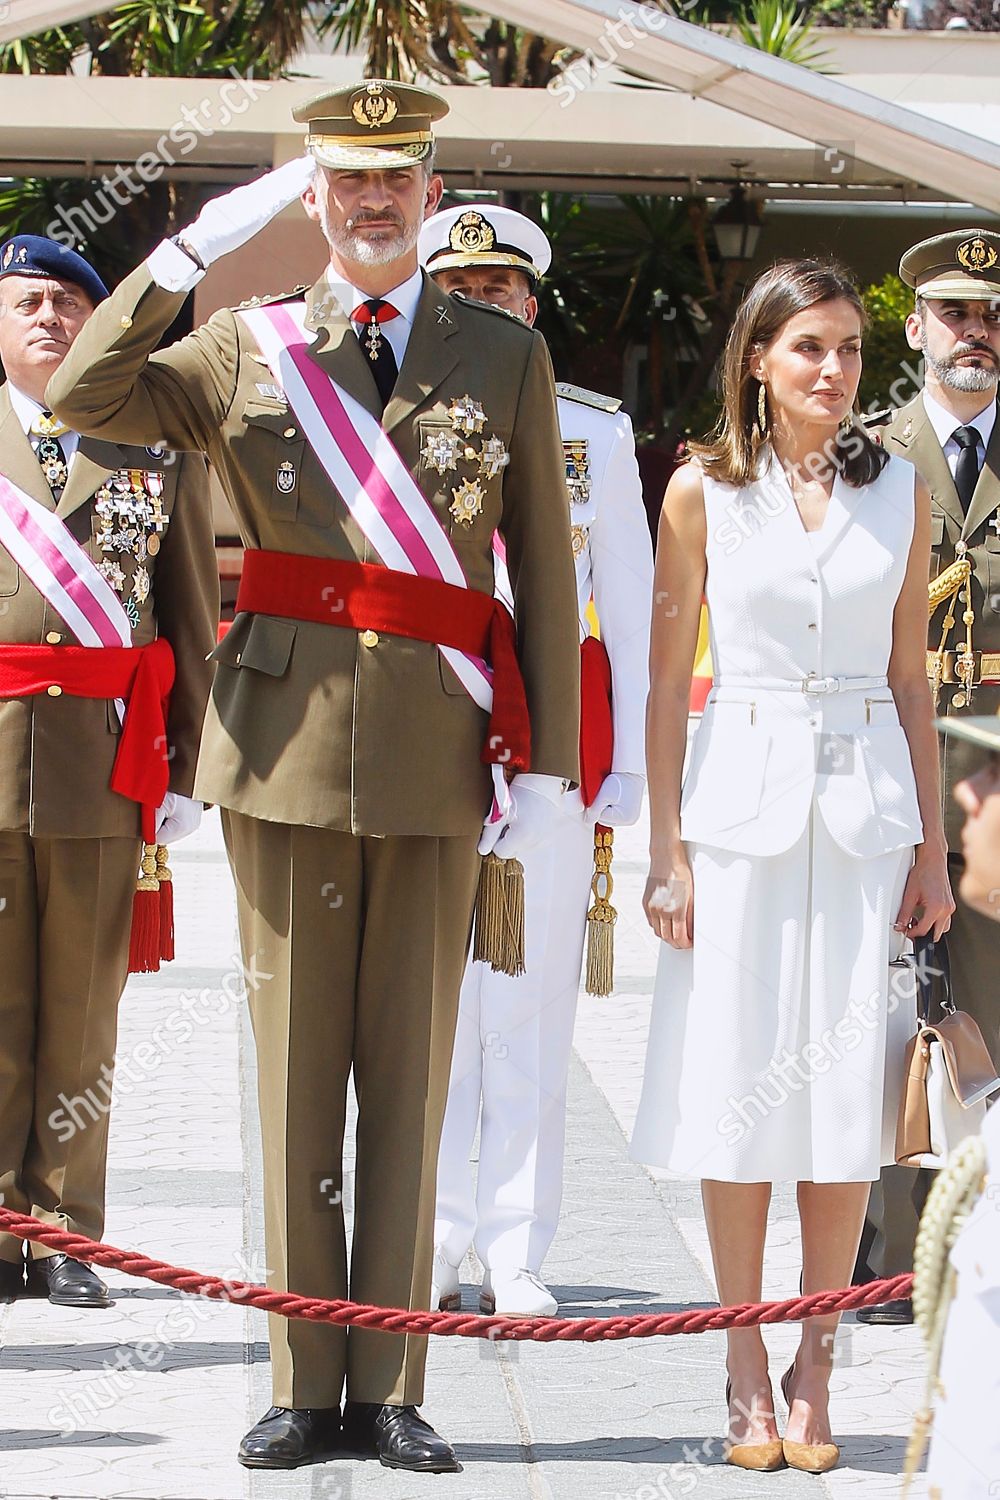 spanish-royals-deliver-the-royal-dispatch-the-central-academy-of-defense-madrid-spain-shutterstock-editorial-9764903u.jpg